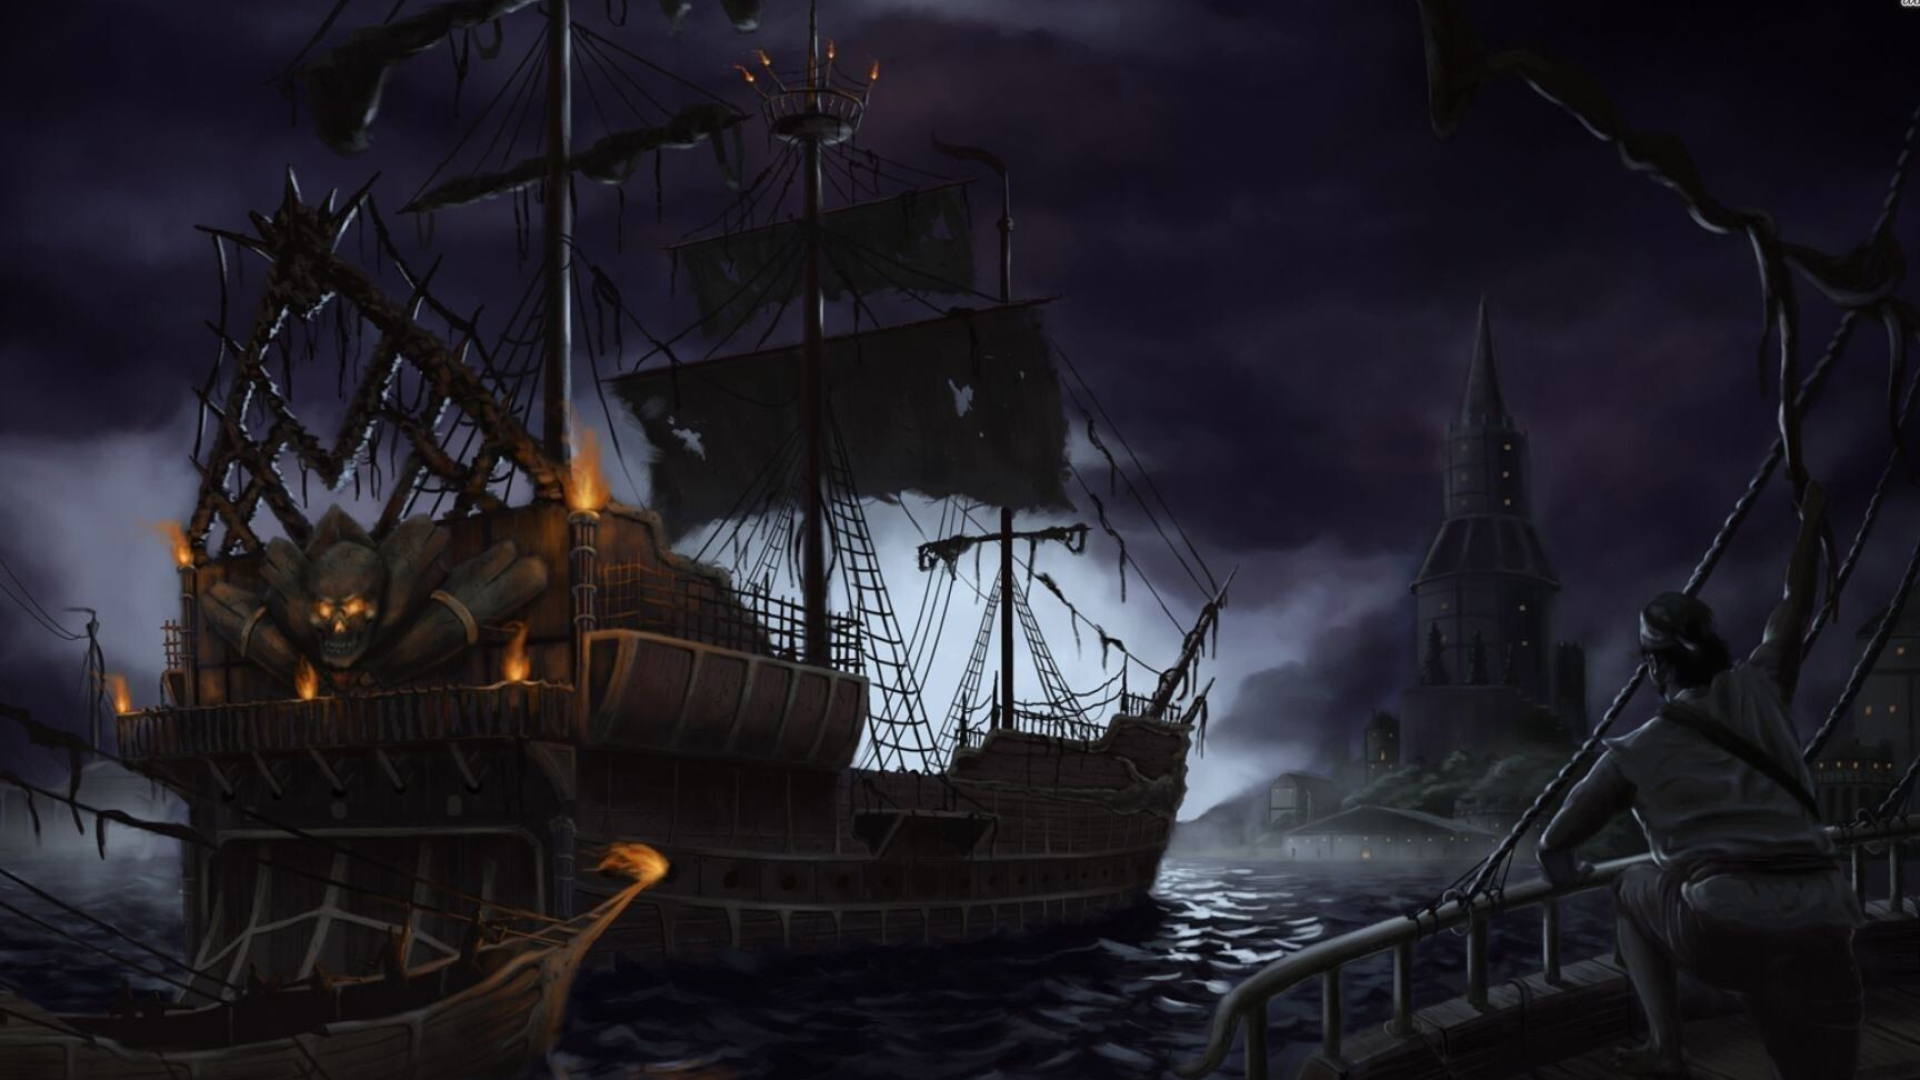 Ghost Ship: The object of the stories of cursed vessels that never sink. 1920x1080 Full HD Wallpaper.